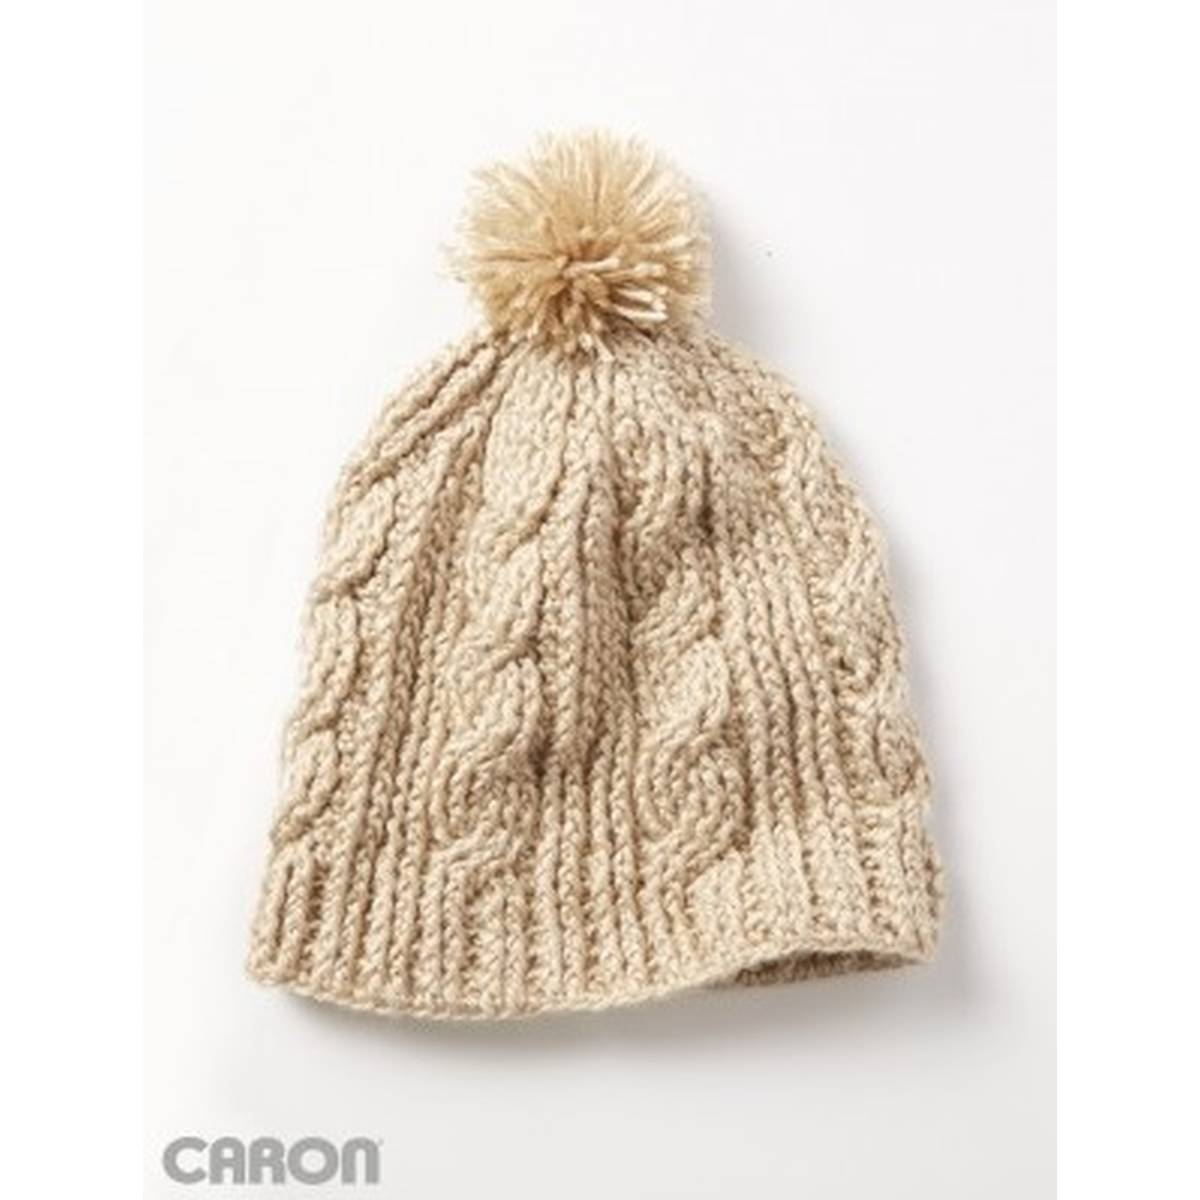 Free Knitting Patterns For Hats Uk Free Pattern Caron Cable Twist Hat Hobcraft